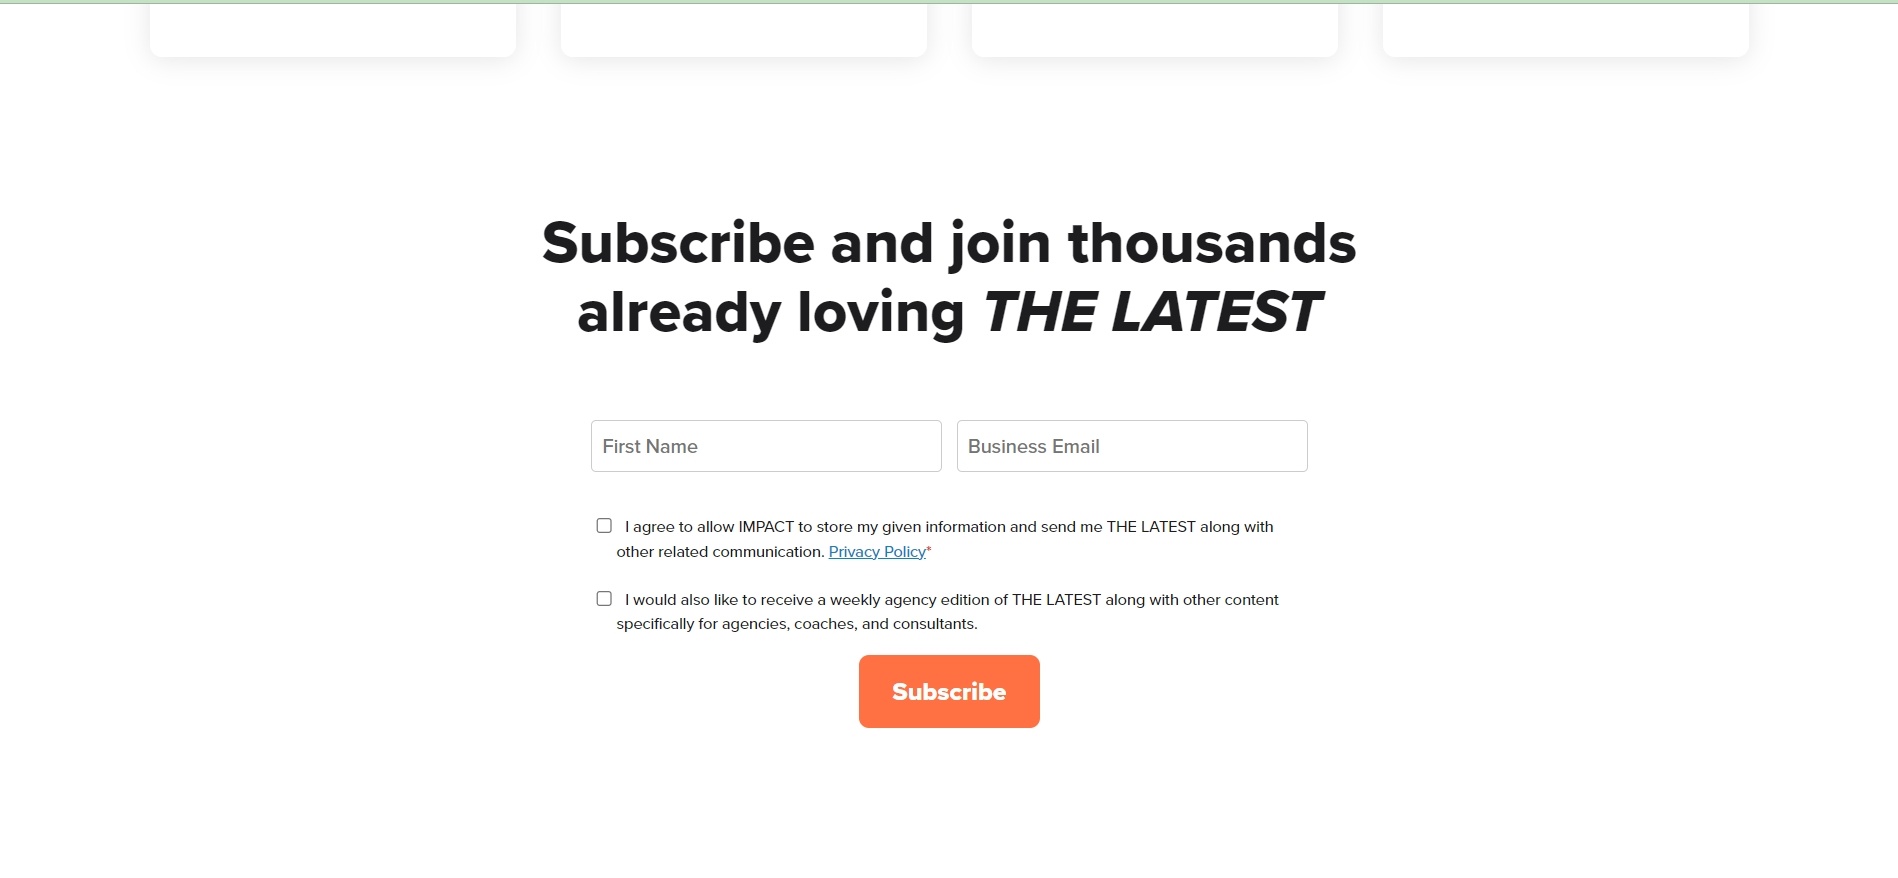 ImpactPlus has a basic newsletter sign up offer